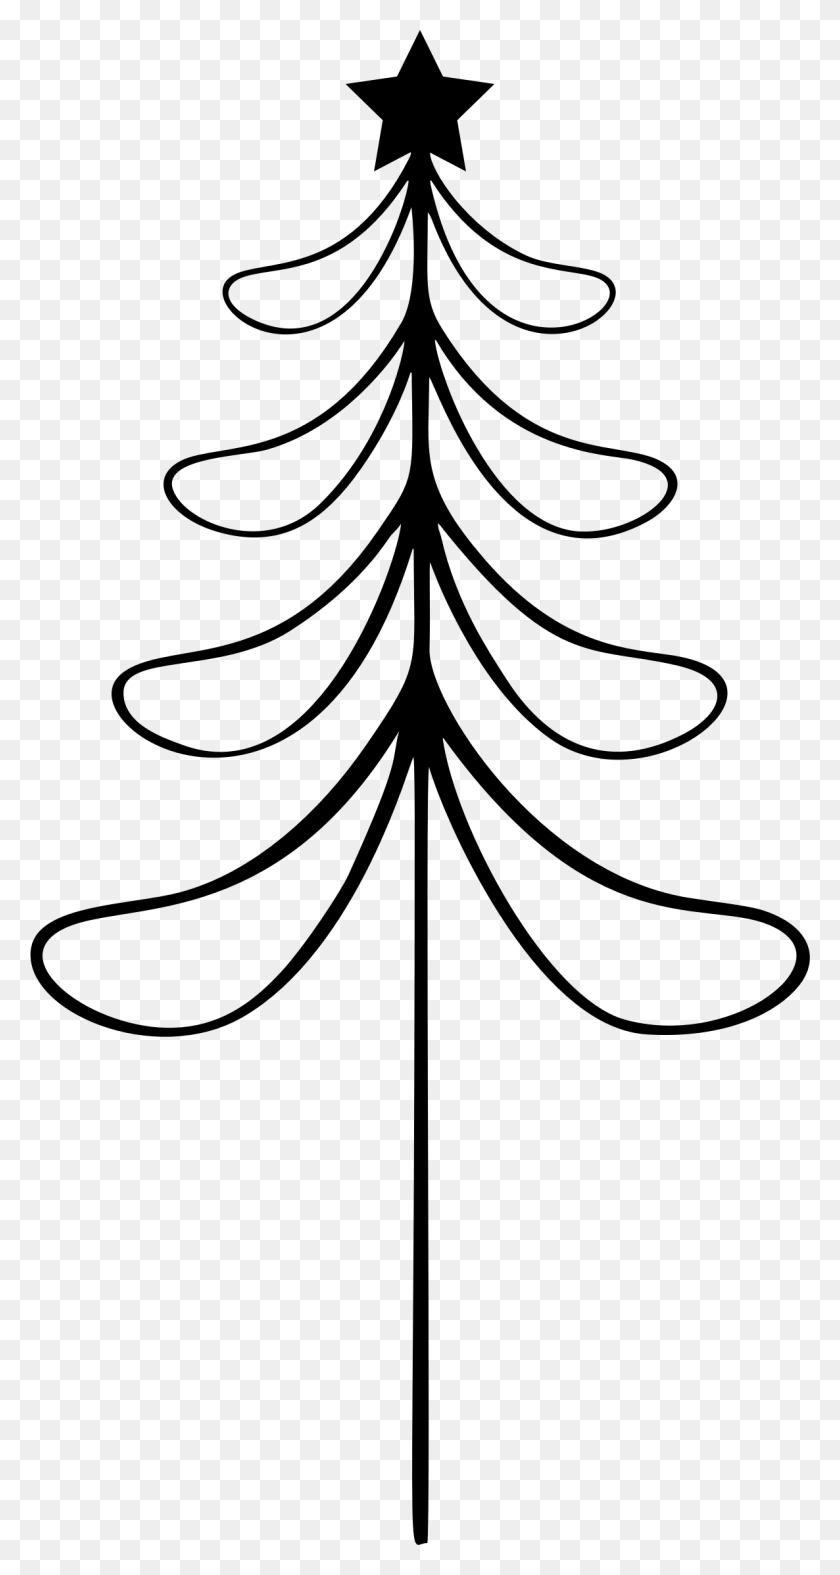 1186x2305 This Free Icons Design Of Abstract Christmas Tree Line Art, Grey, World Of Warcraft Hd Png